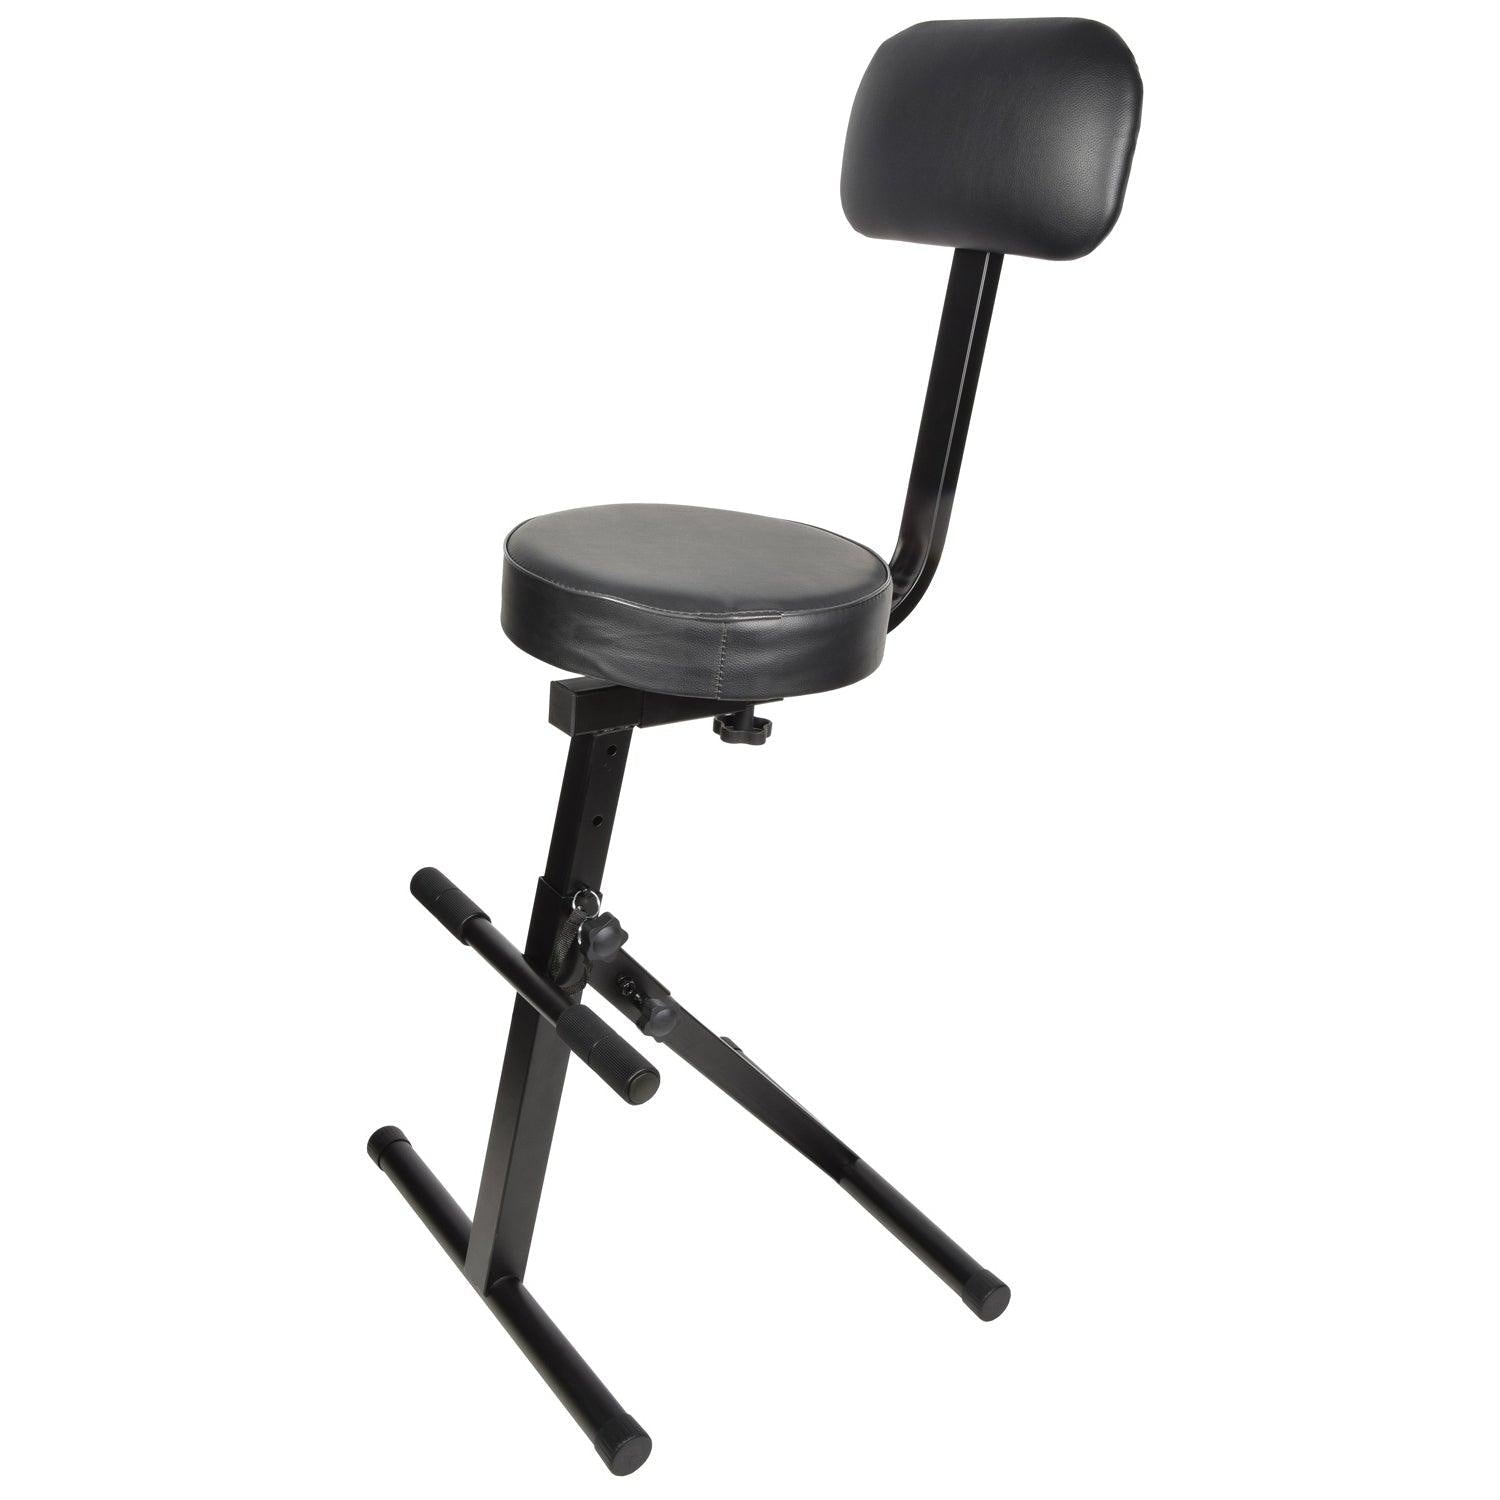 Chord Musician Seat Foldable High Chair - DY Pro Audio